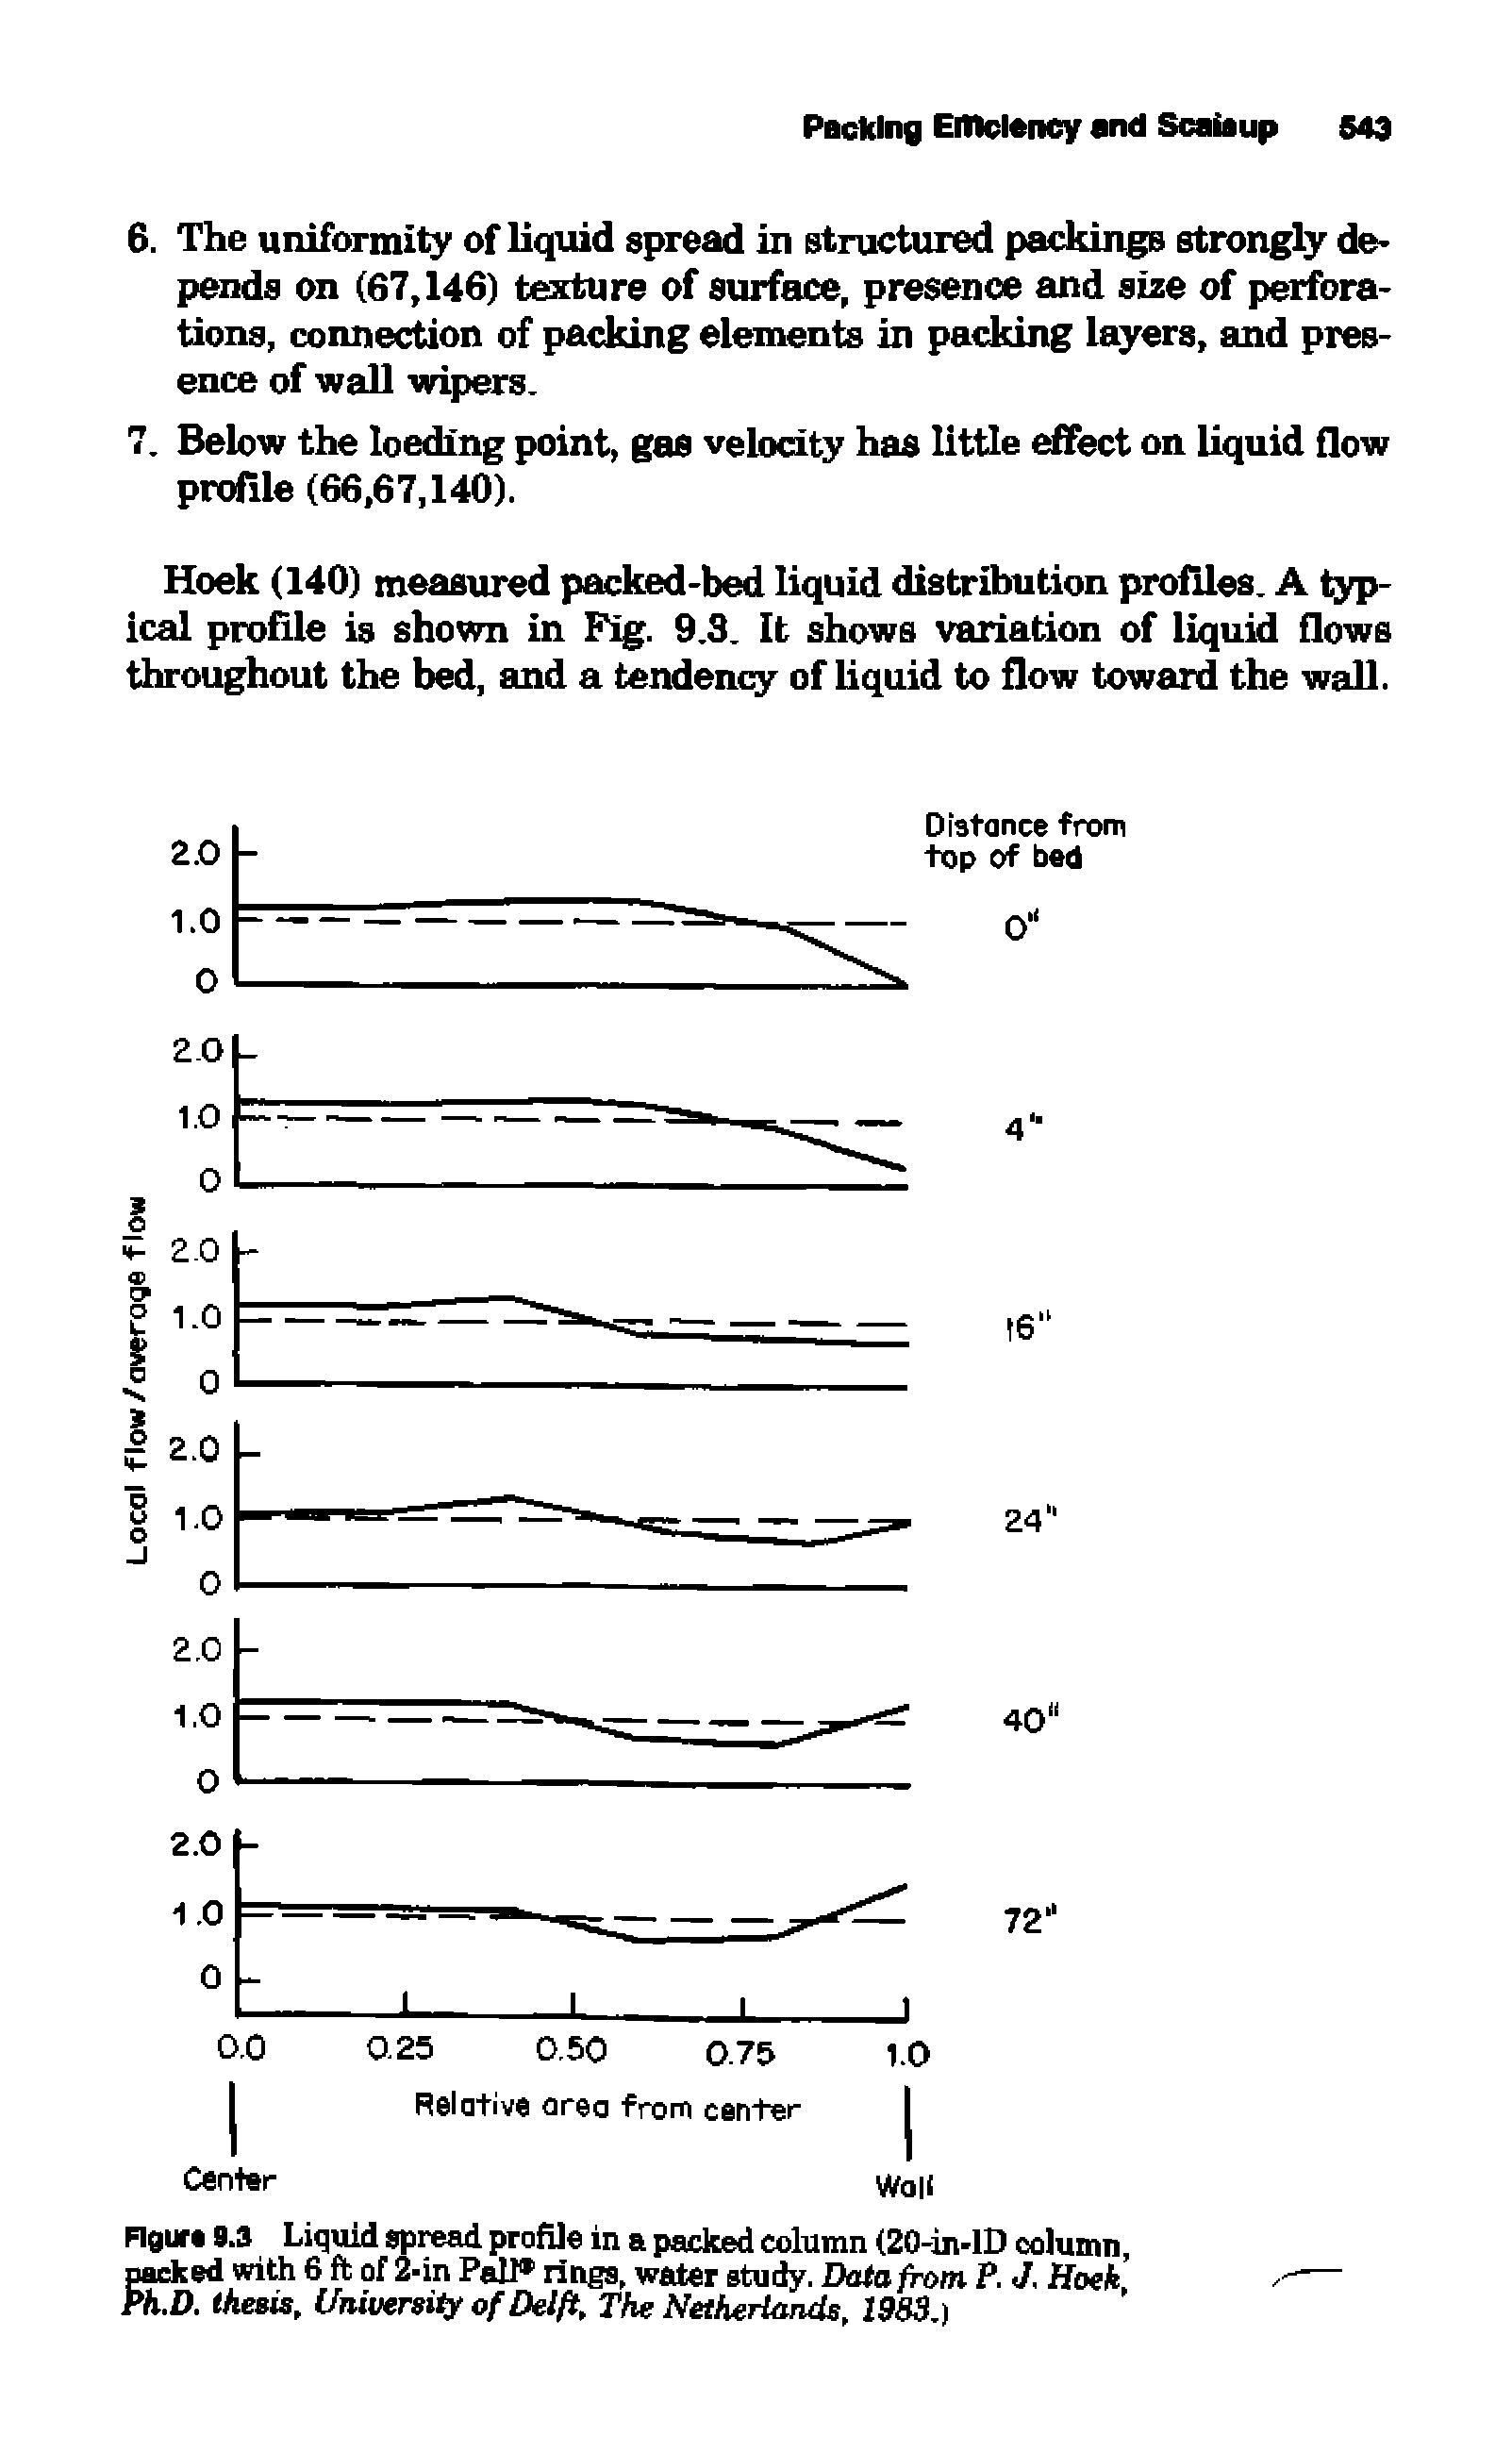 Figure 9.3 Liquid spread profile in a packed column (20-in-lD column, packed with 6 ft of 2-in Pall rings, water study. Data from P. J, Hoek, Ph.D. thesis. University of Delft, The Netherlands, 1983.)...